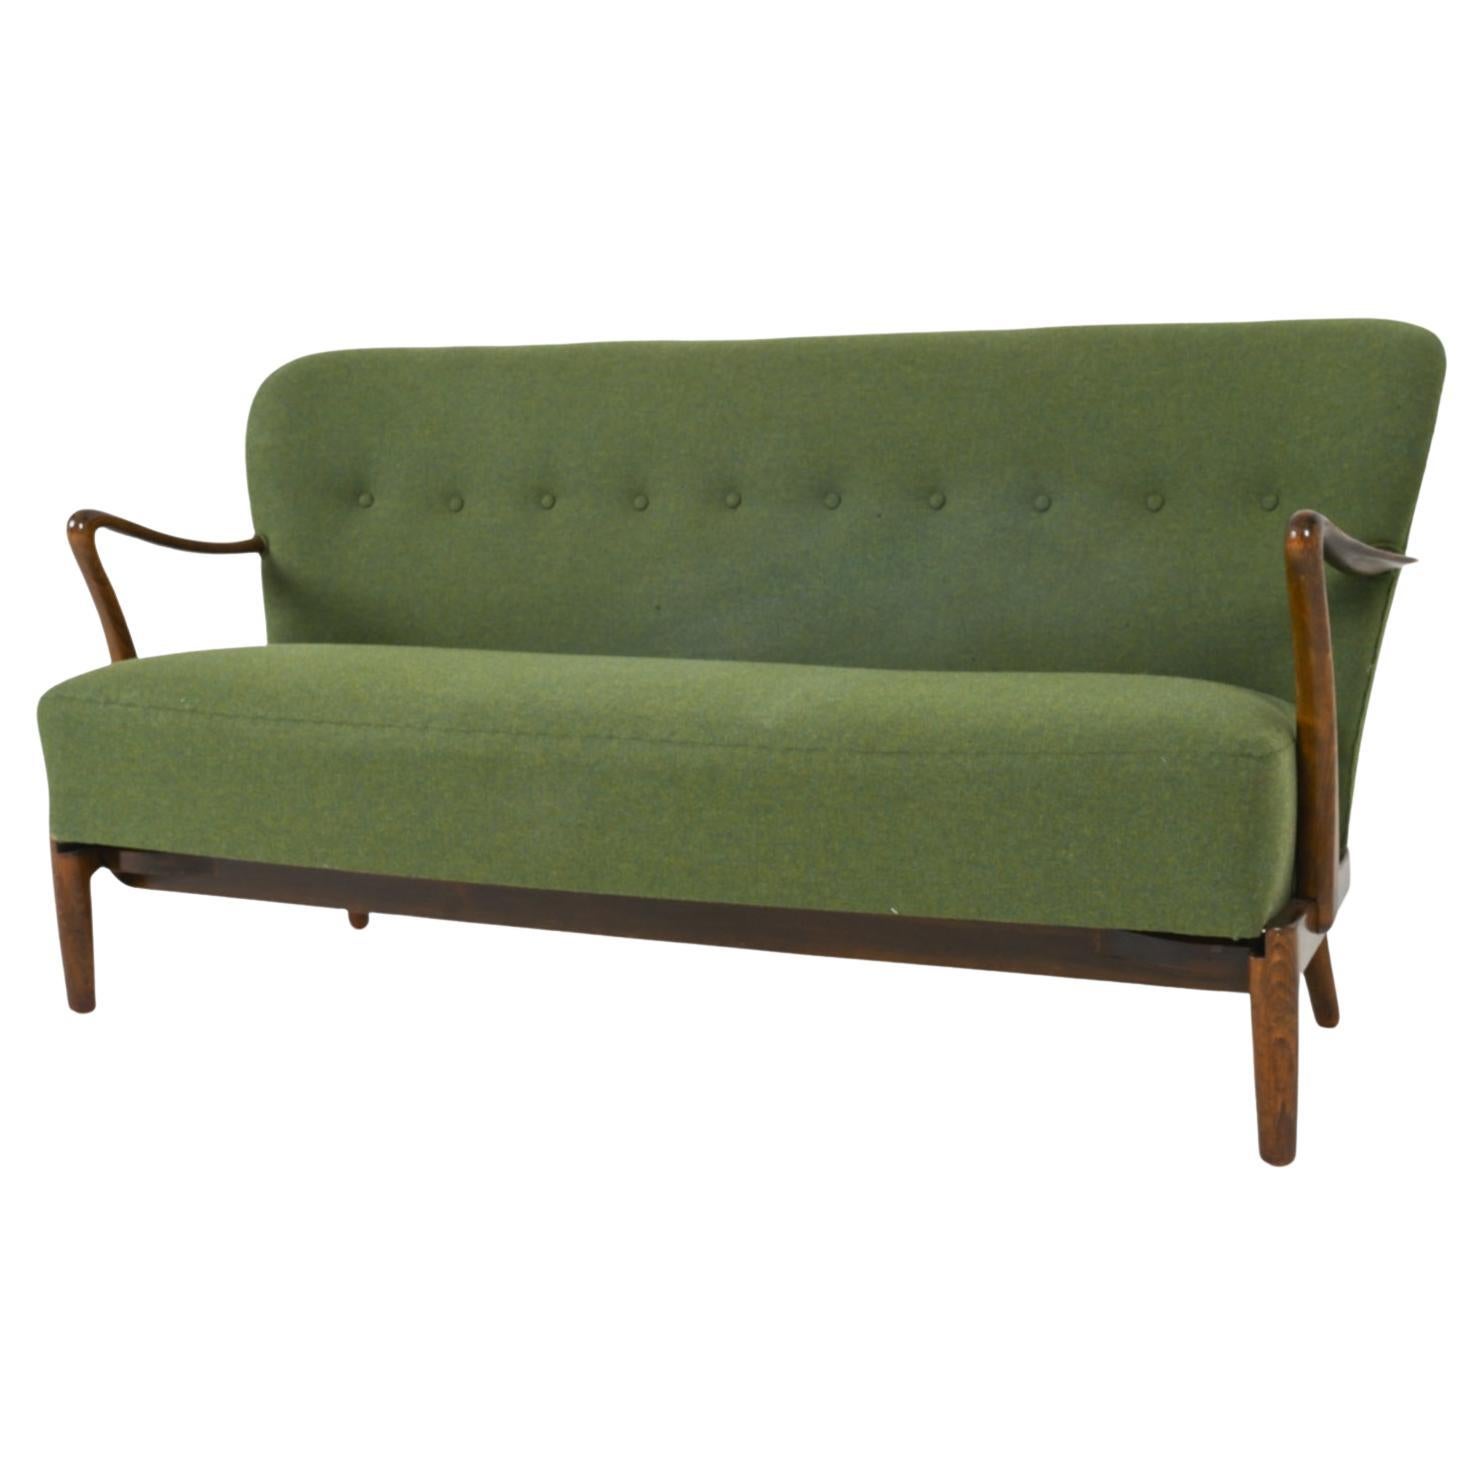 Upholstered Beech Three-Seat Sofa by Alfred Christensen, Denmark 1950's For Sale